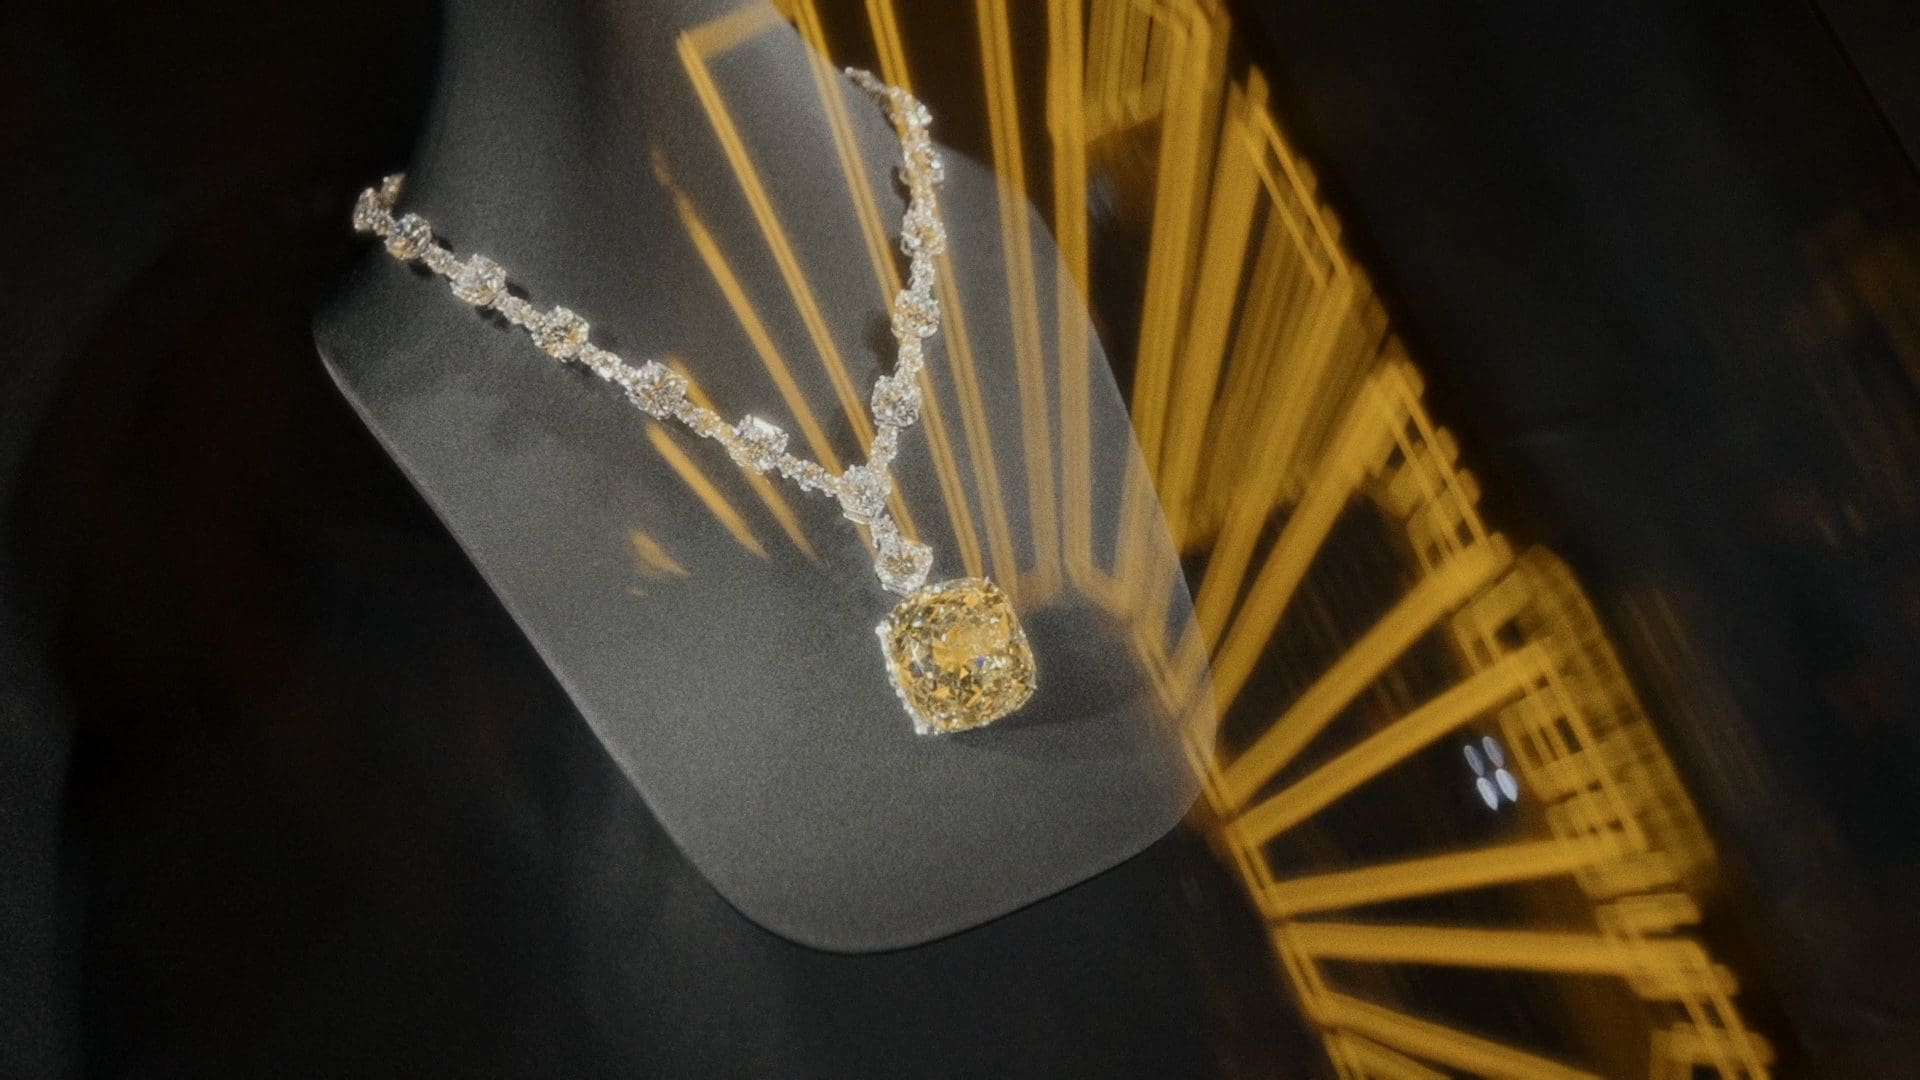 Stunning display of a Tiffany & Co. diamond necklace with a large yellow central diamond, elegantly draped on a mannequin with a radiant reflection of light creating a dynamic backdrop.